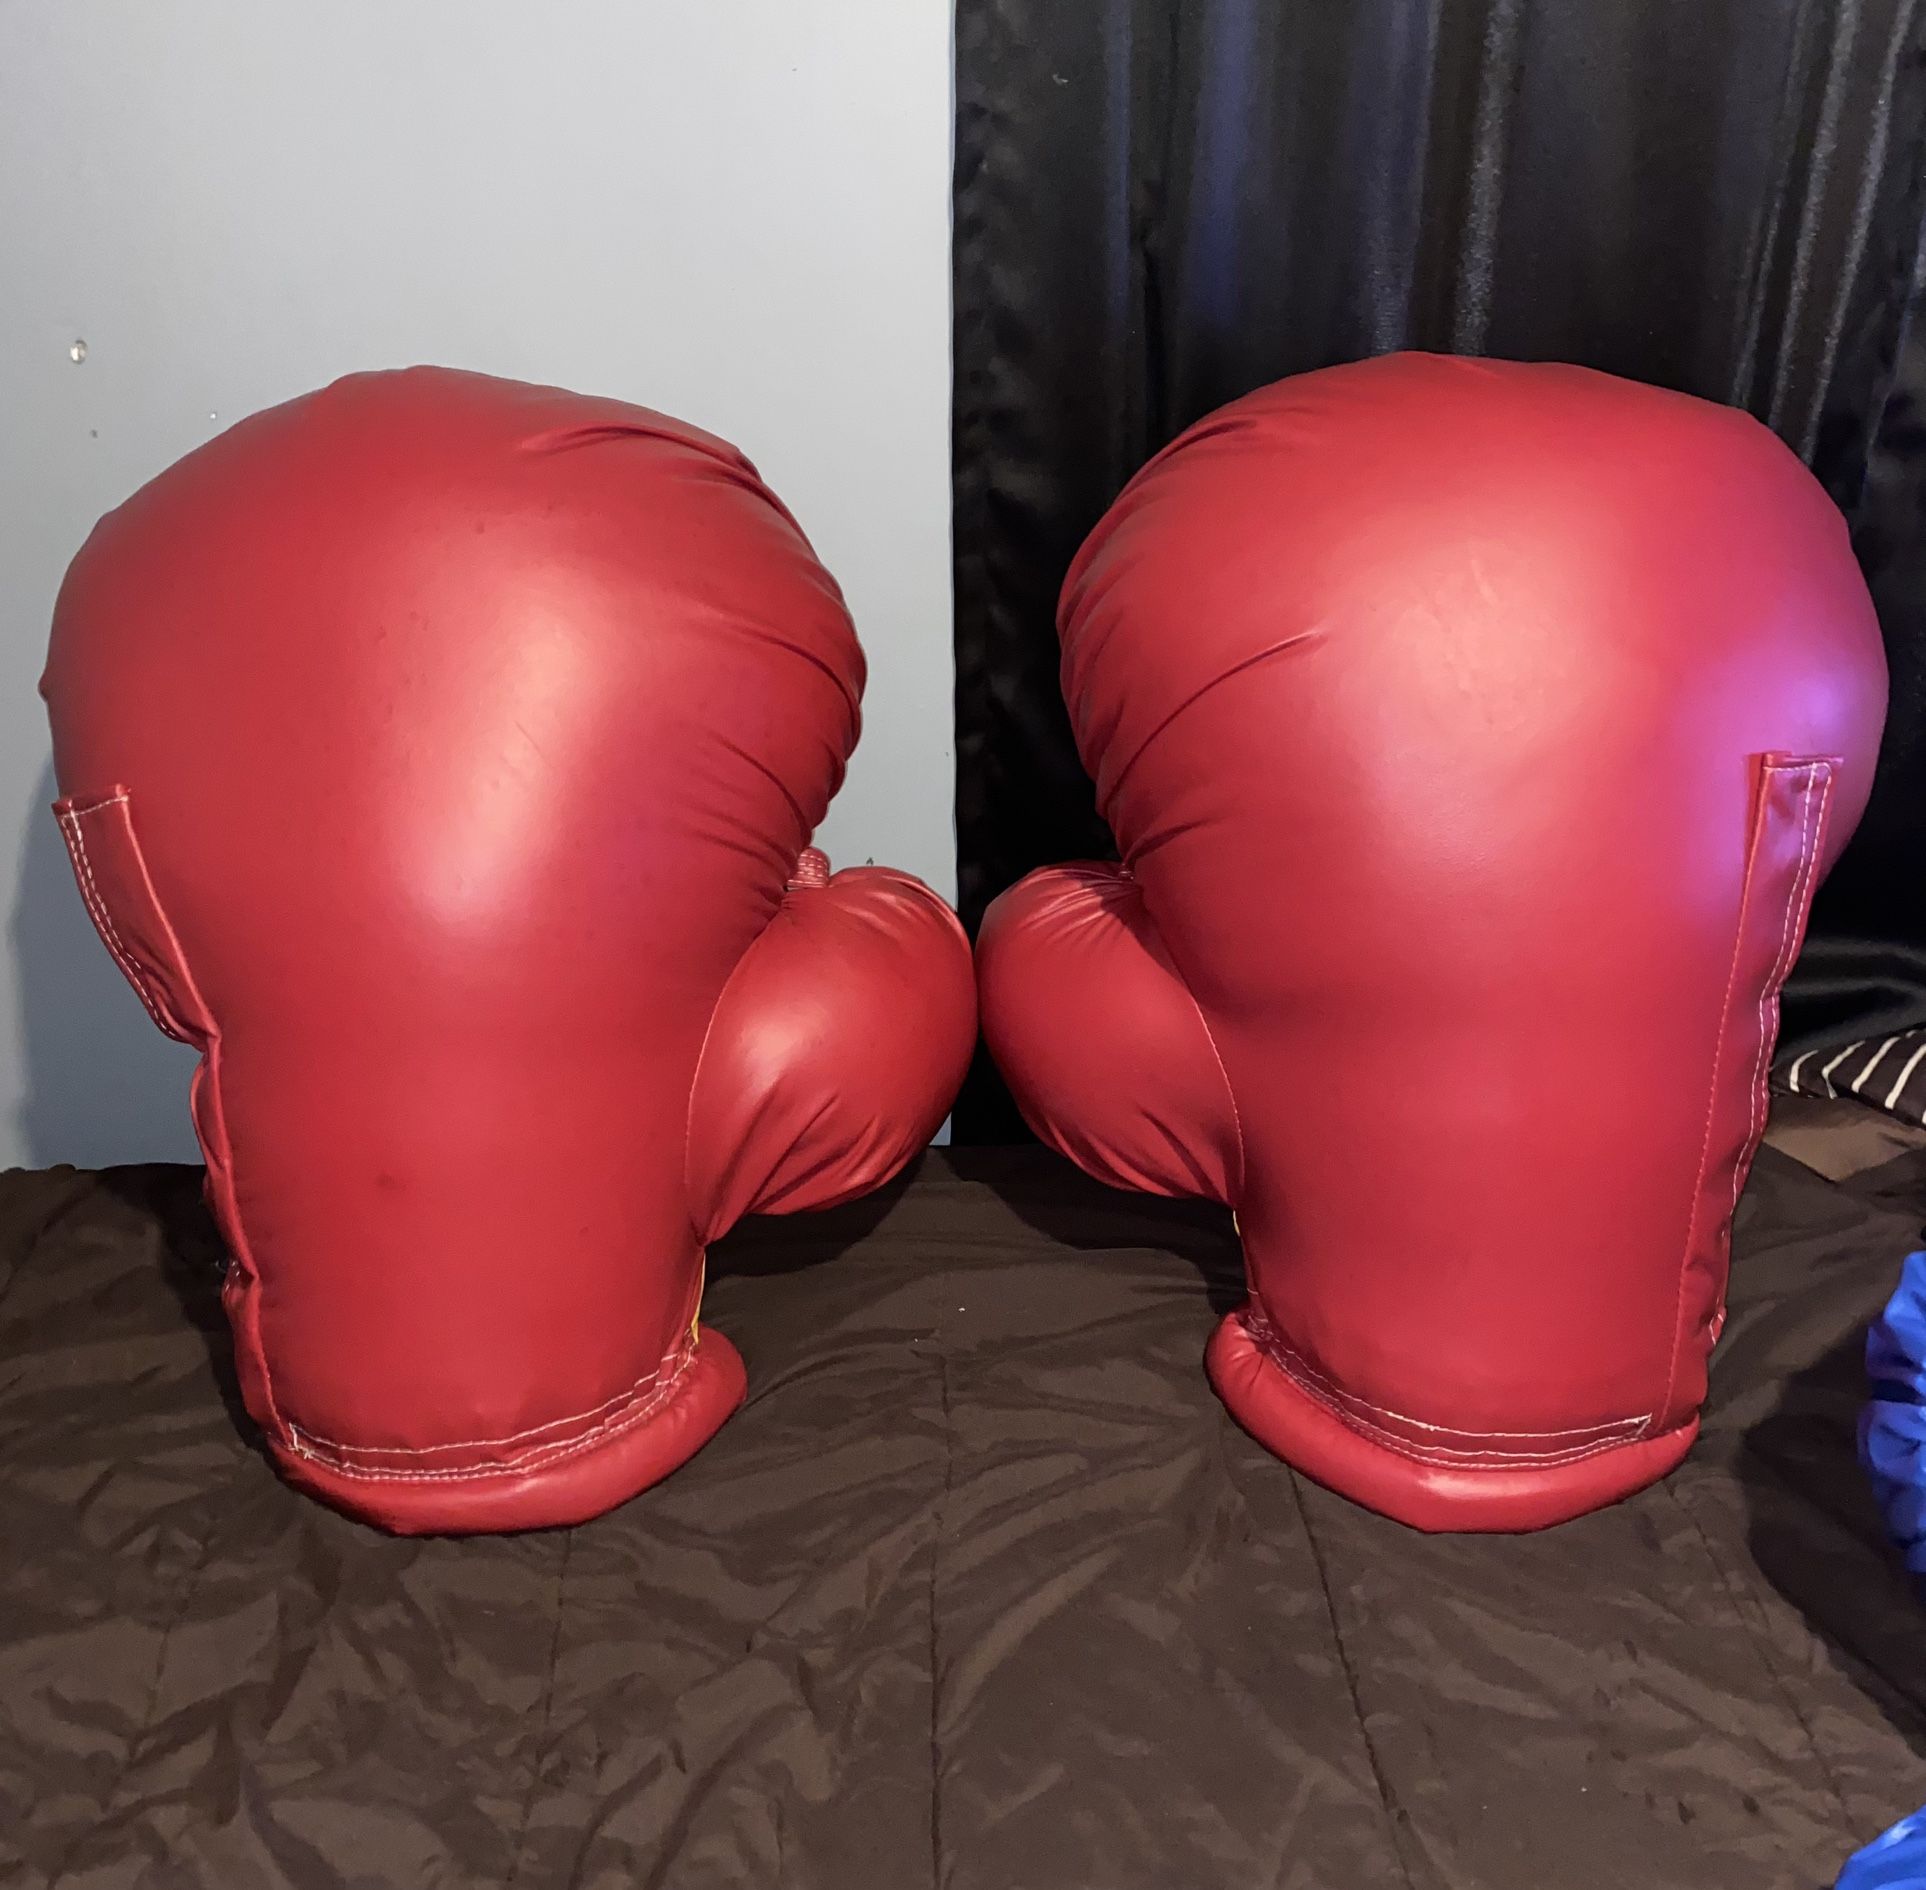 2 Pairs Of Huge Heavy Duty Boxing Gloves